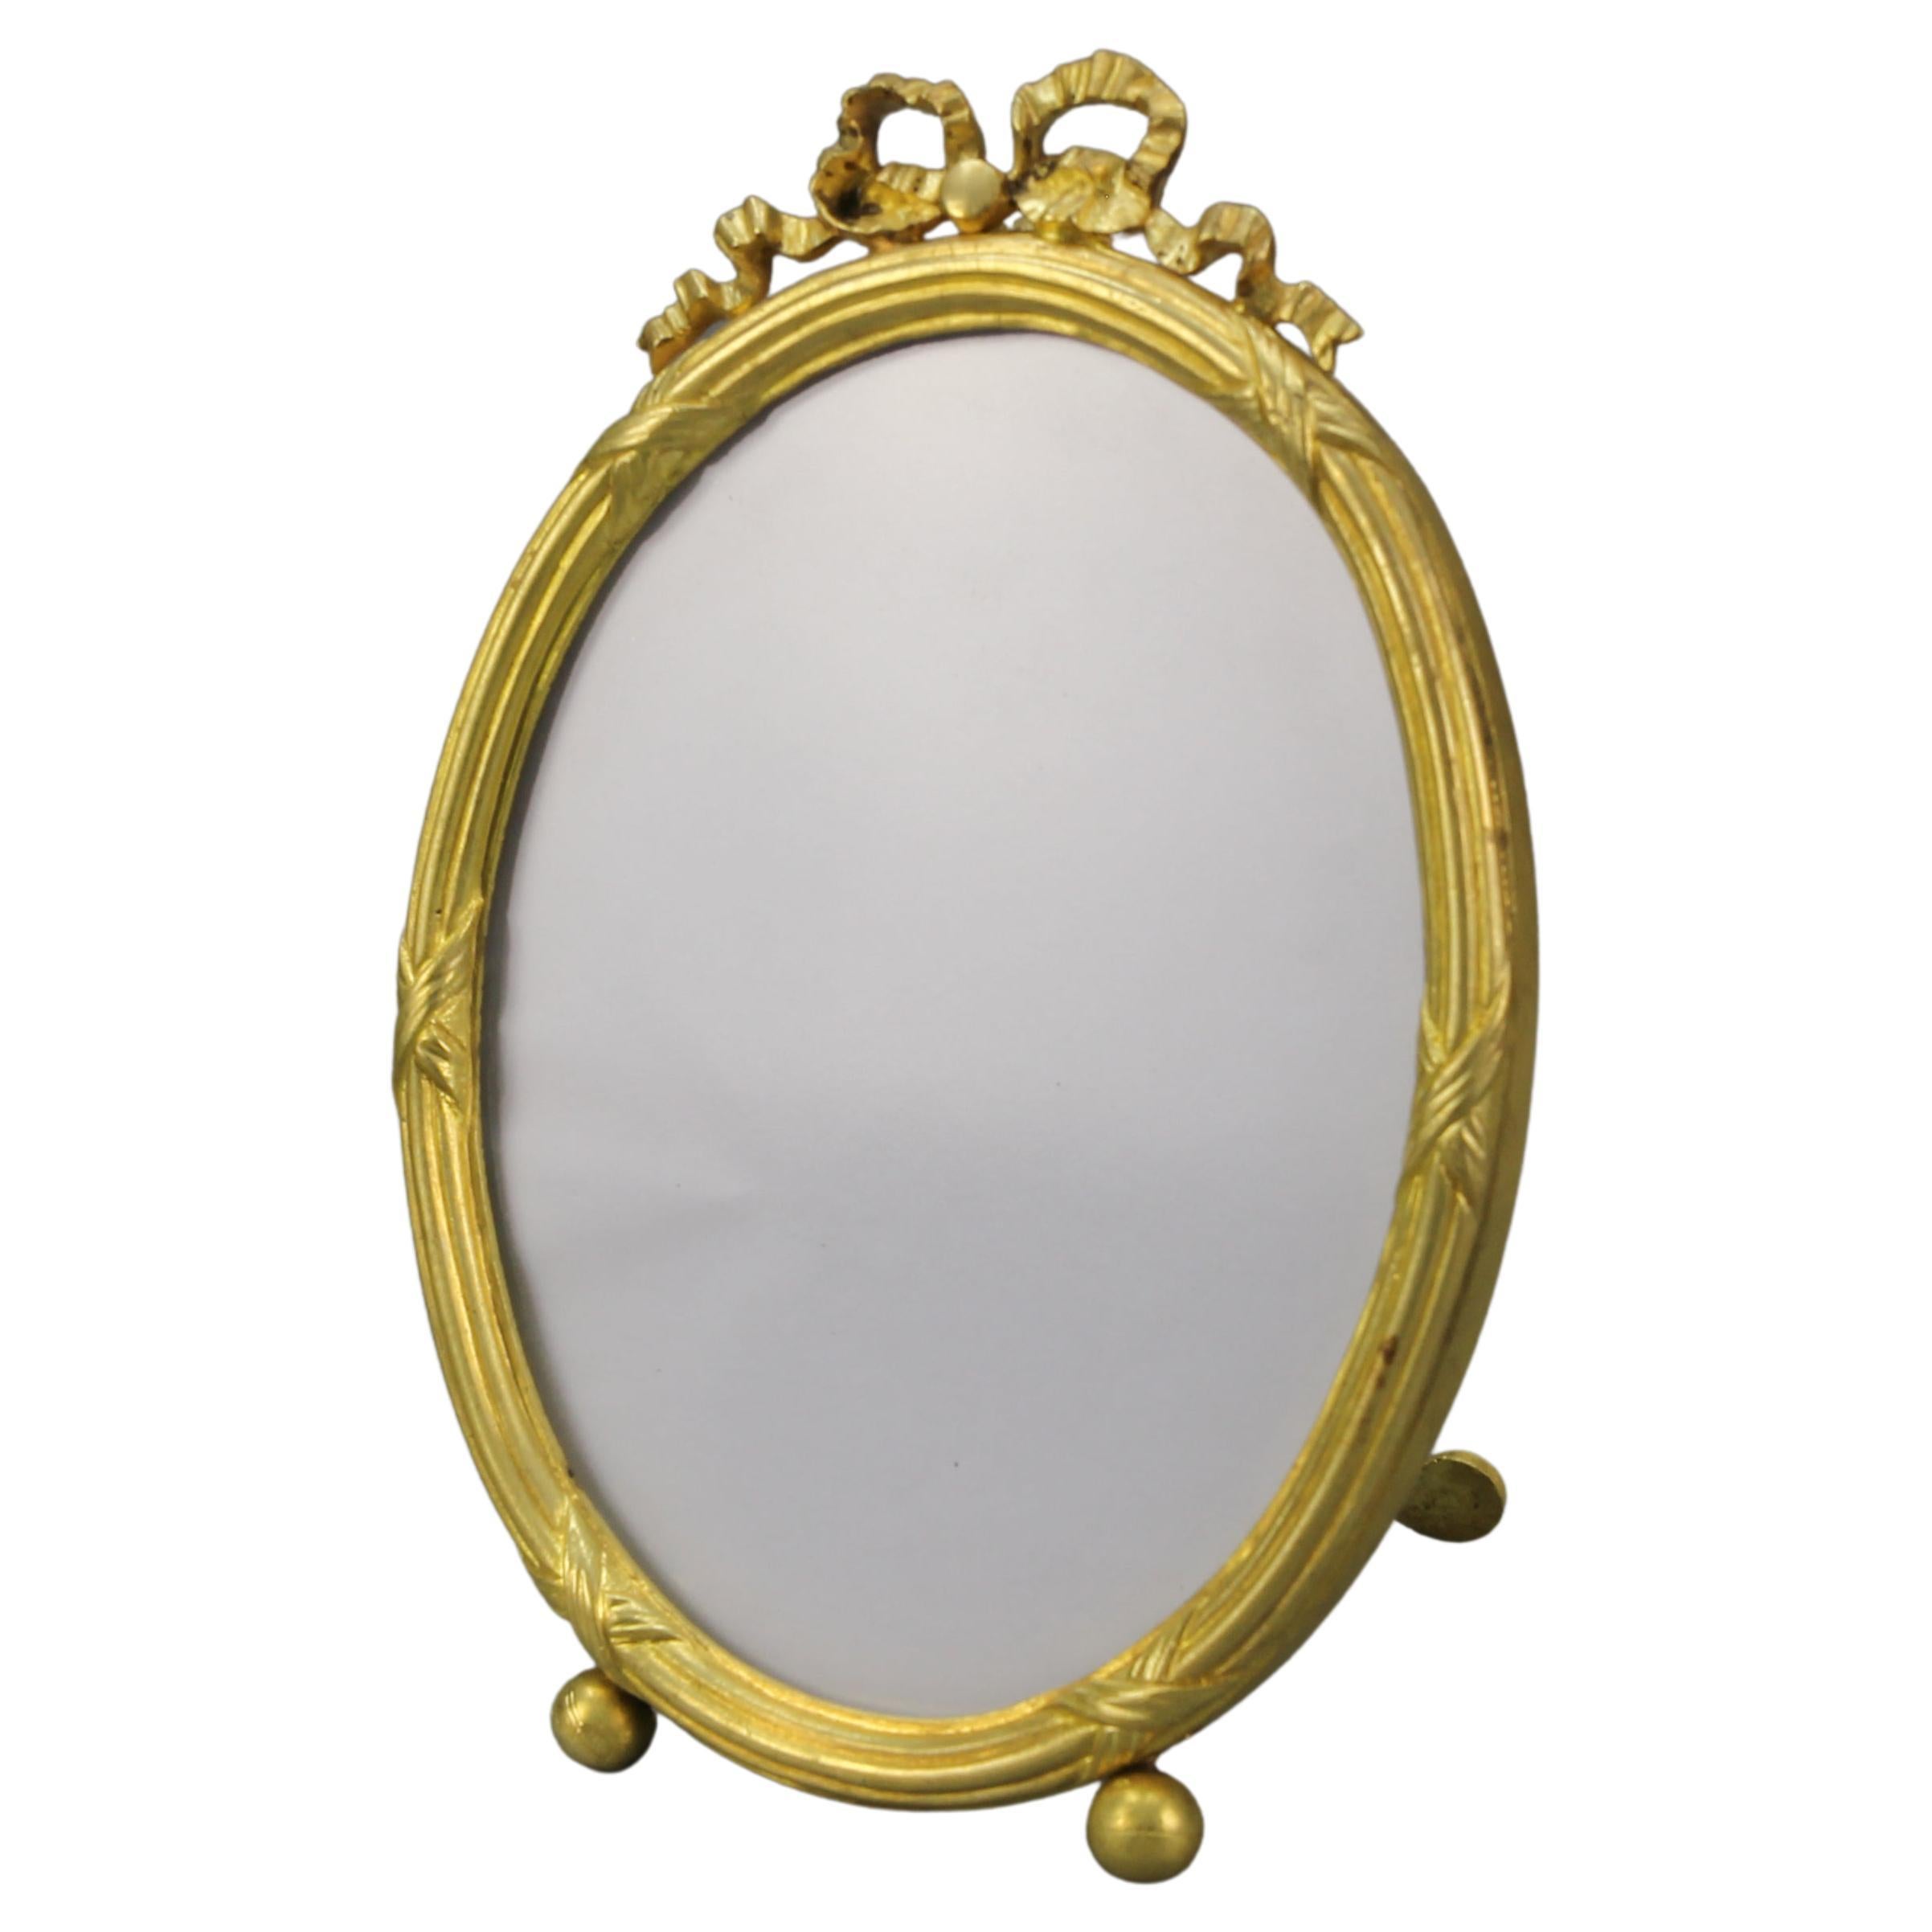 Early 20th Century French Louis XVI Style Bronze Oval Desktop Picture Frame